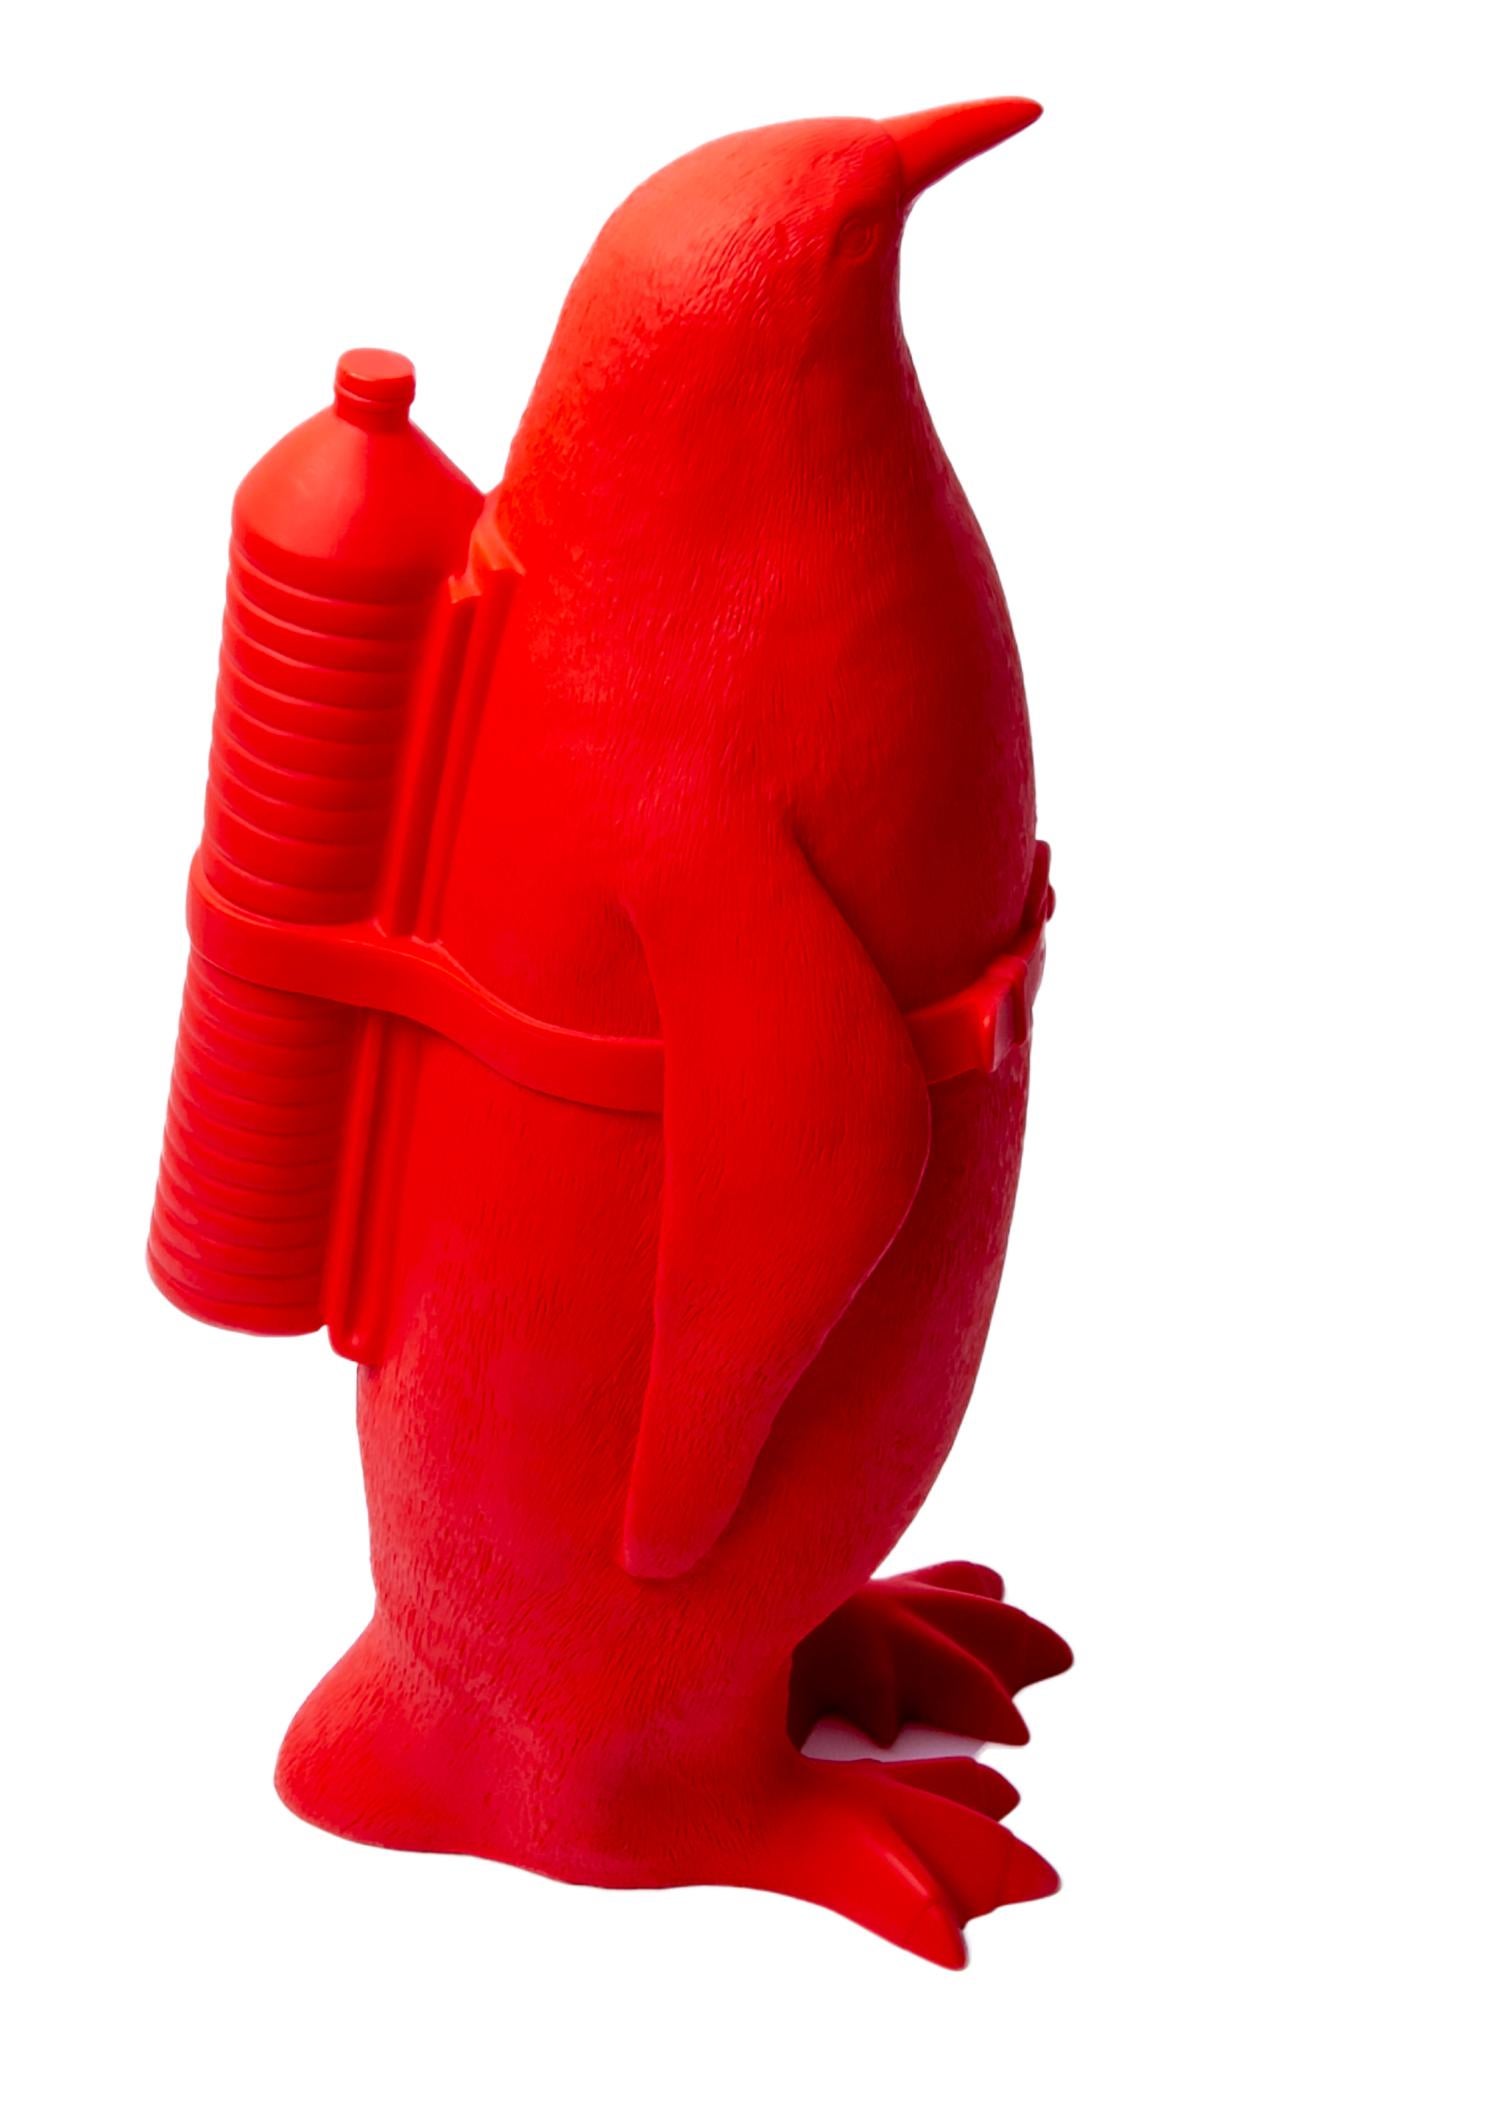 William Sweetlove Figurative Sculpture - Small Cloned Penguin with Water Bottle, in Red